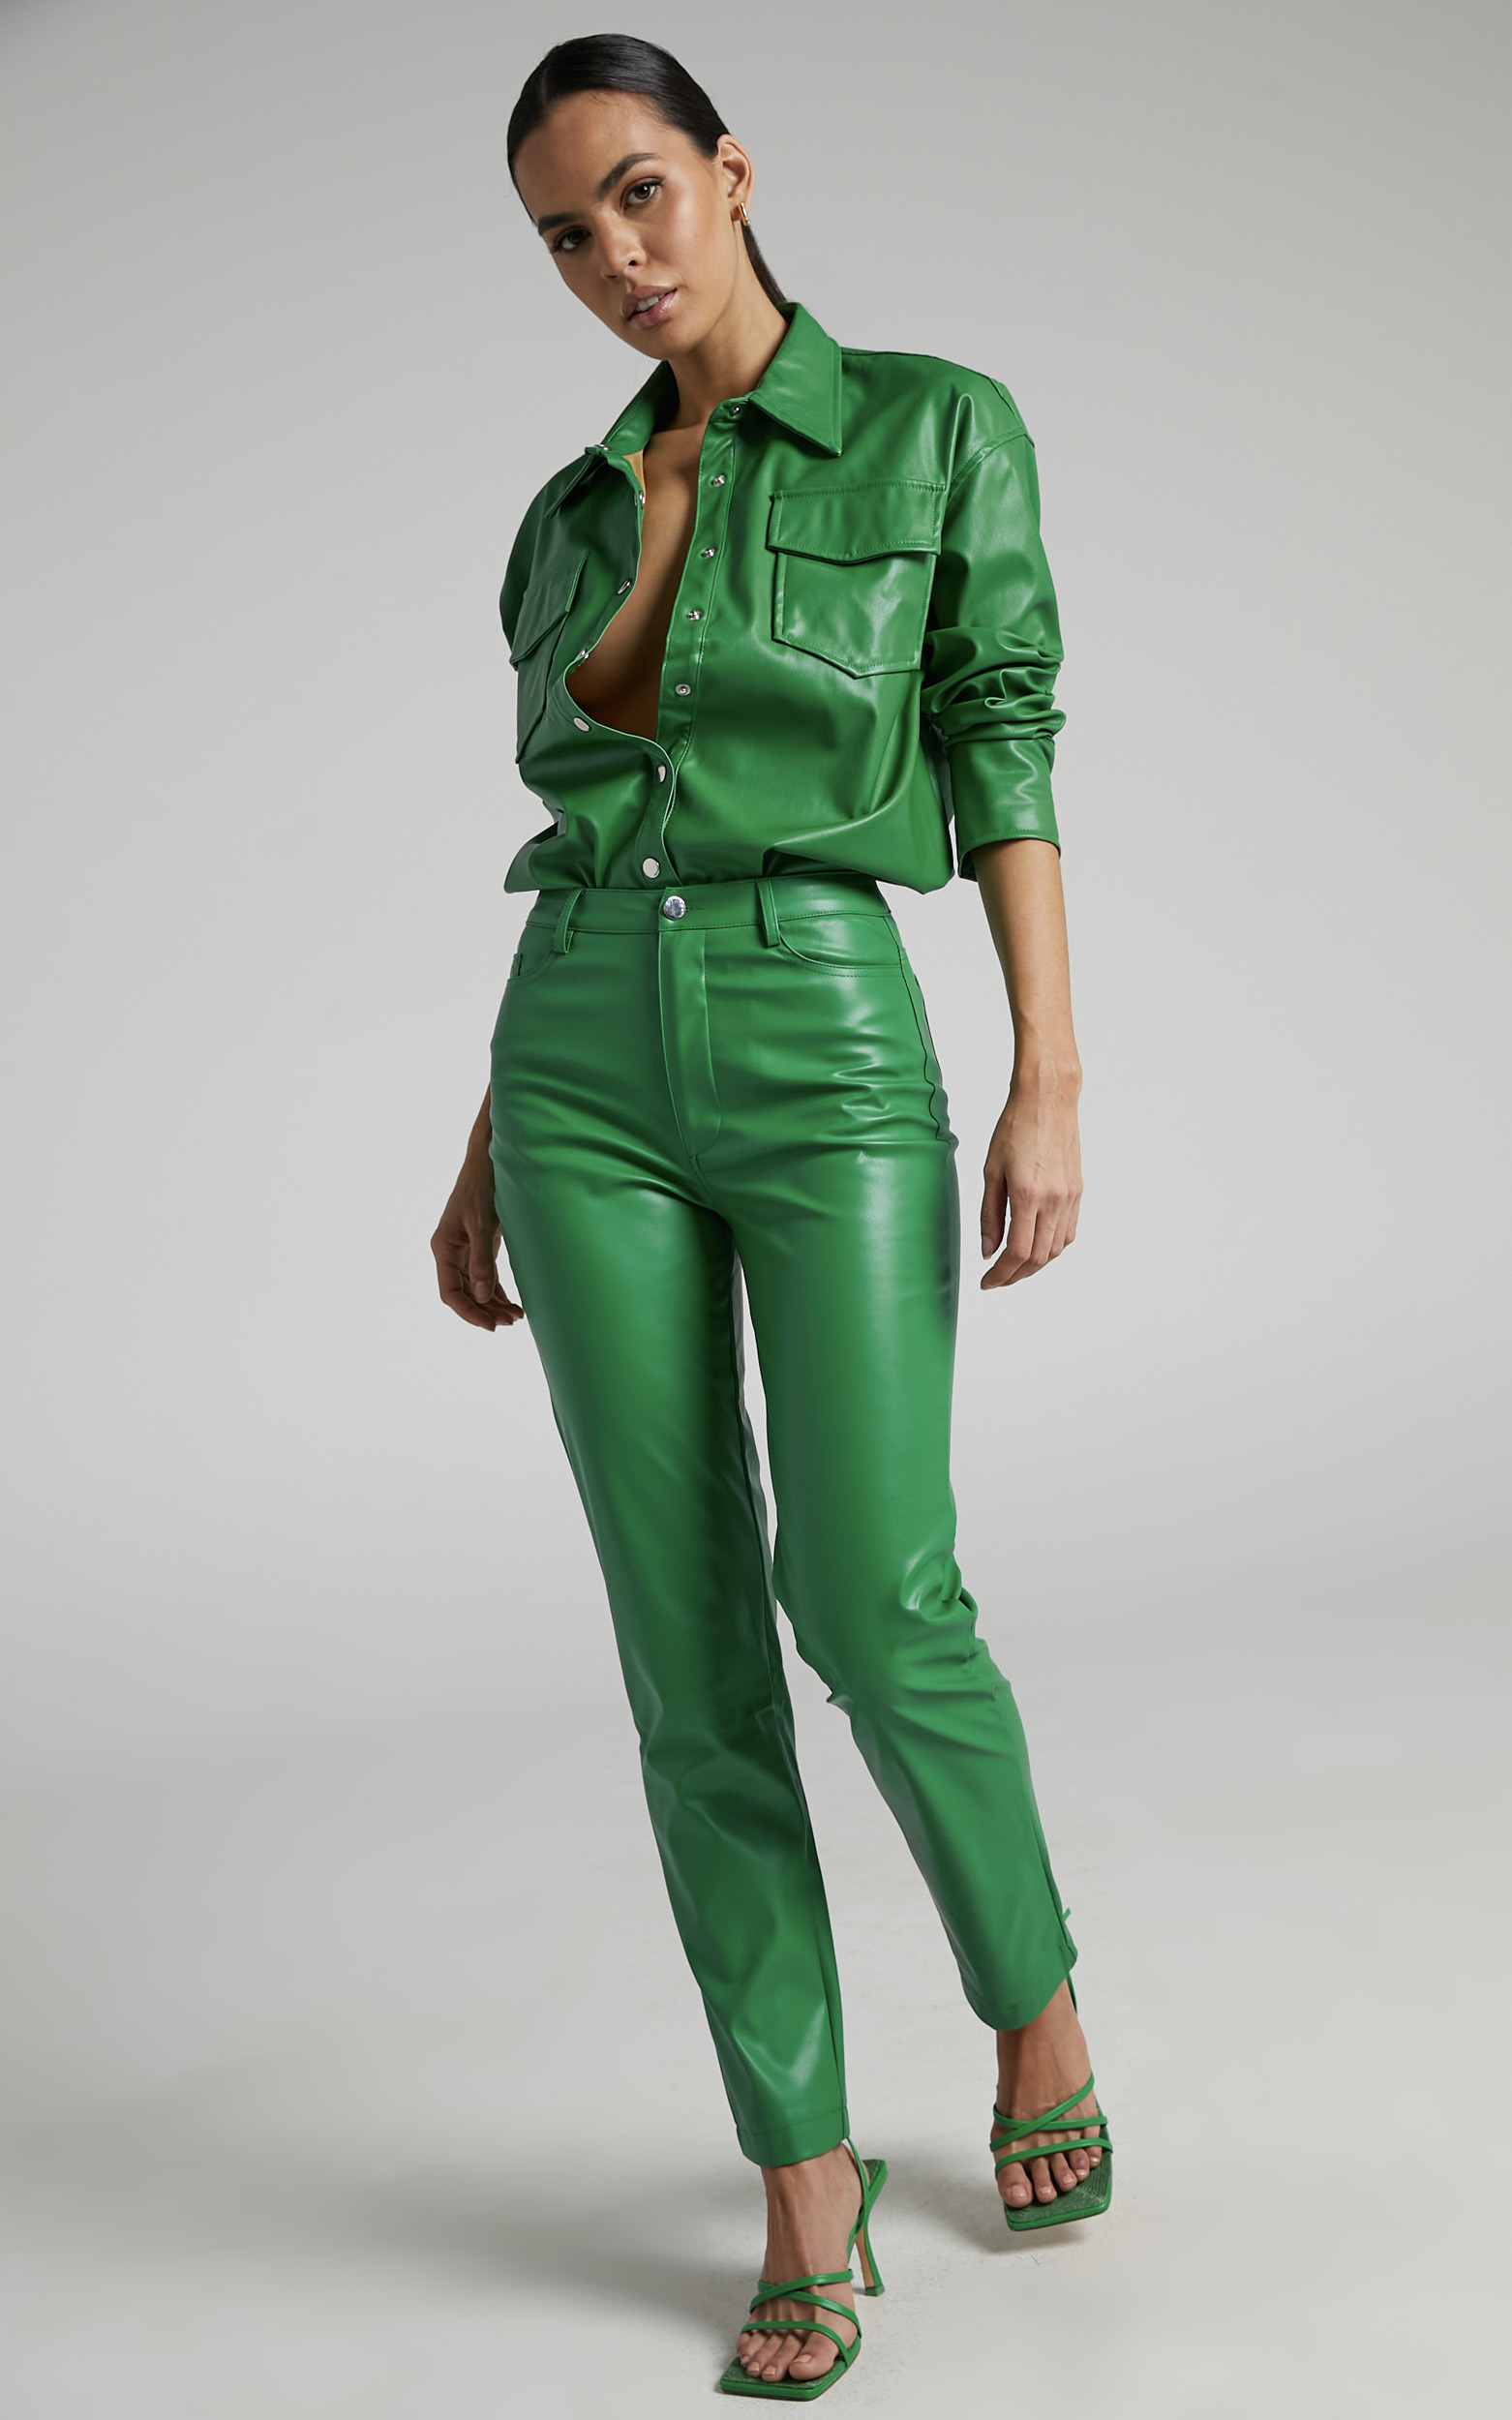 Dilyenne High Waist Straight Leg Faux Leather Pants in Green - 06, GRN3, hi-res image number null